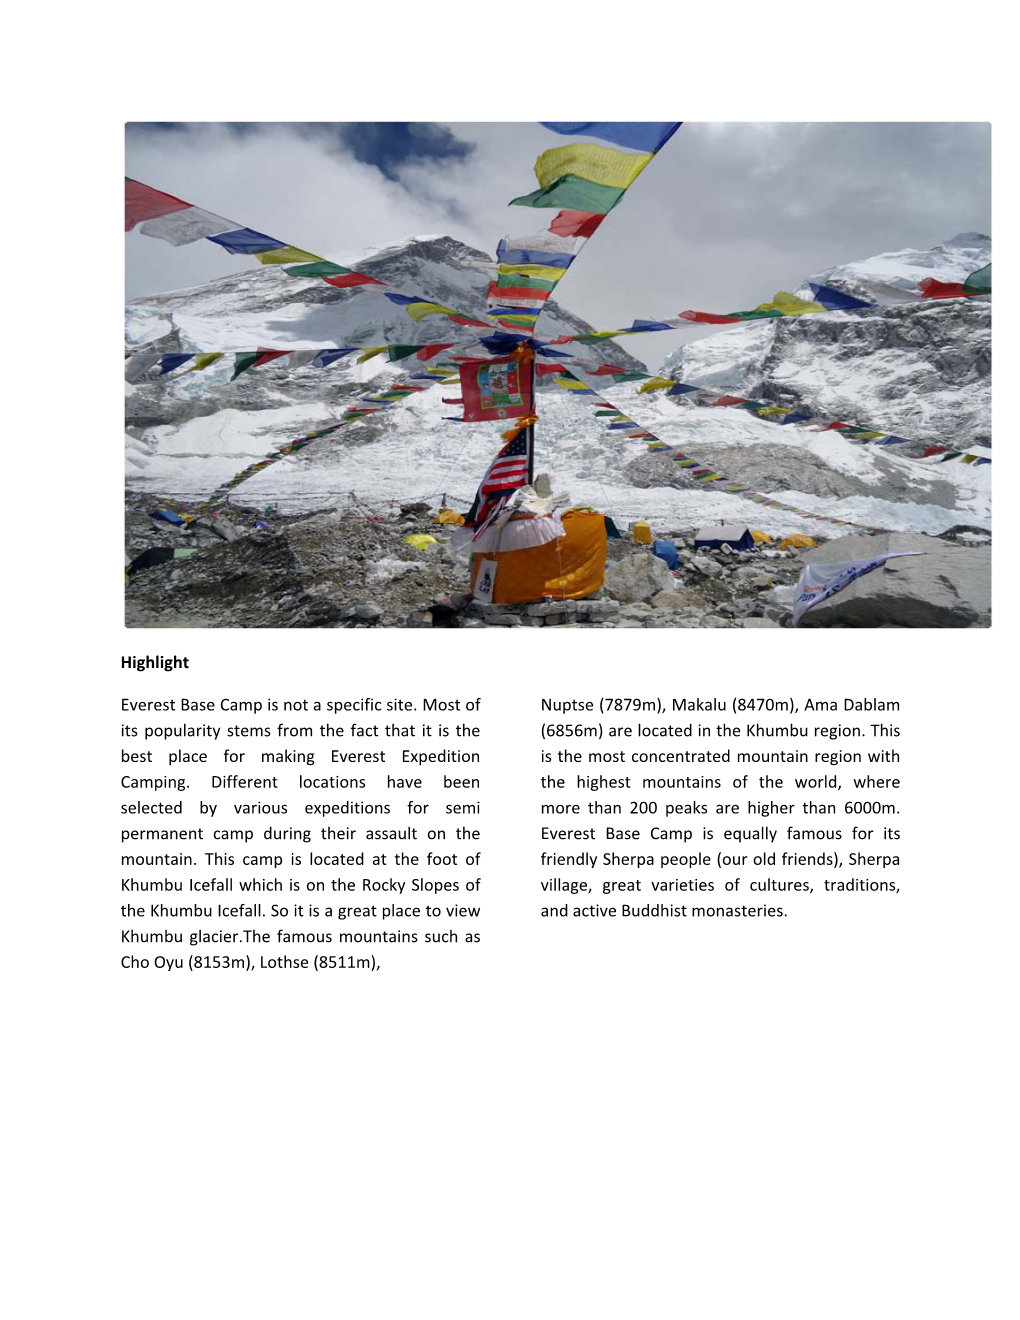 Highlight Everest Base Camp Is Not a Specific Site. Most of Its Popularity